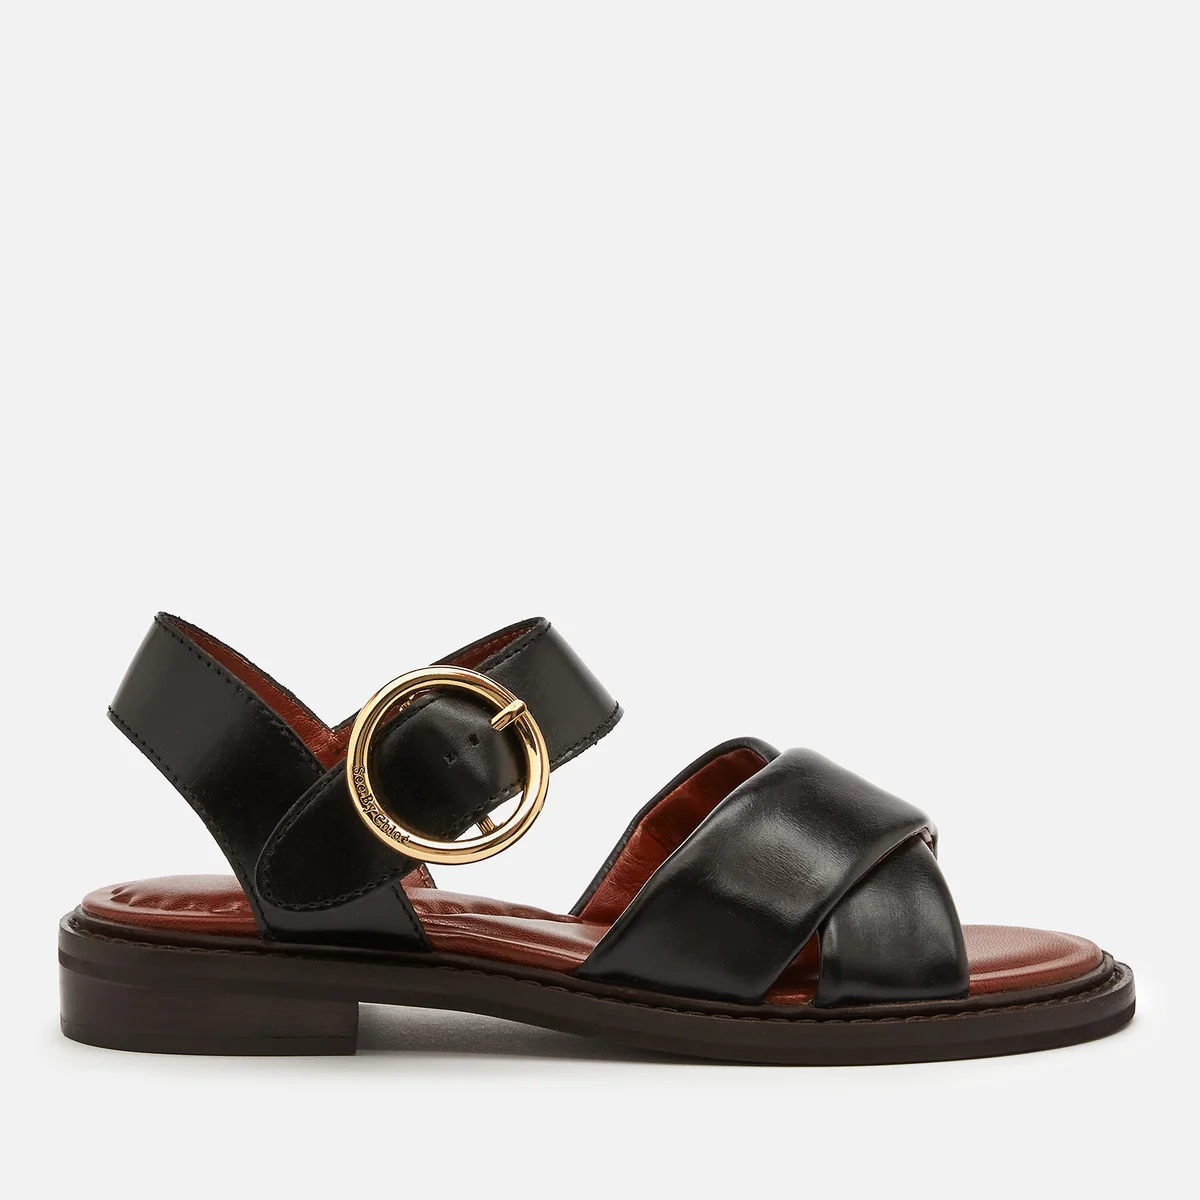 See By Chloé Women's Lyna Leather Flat Sandals - Black Image 1